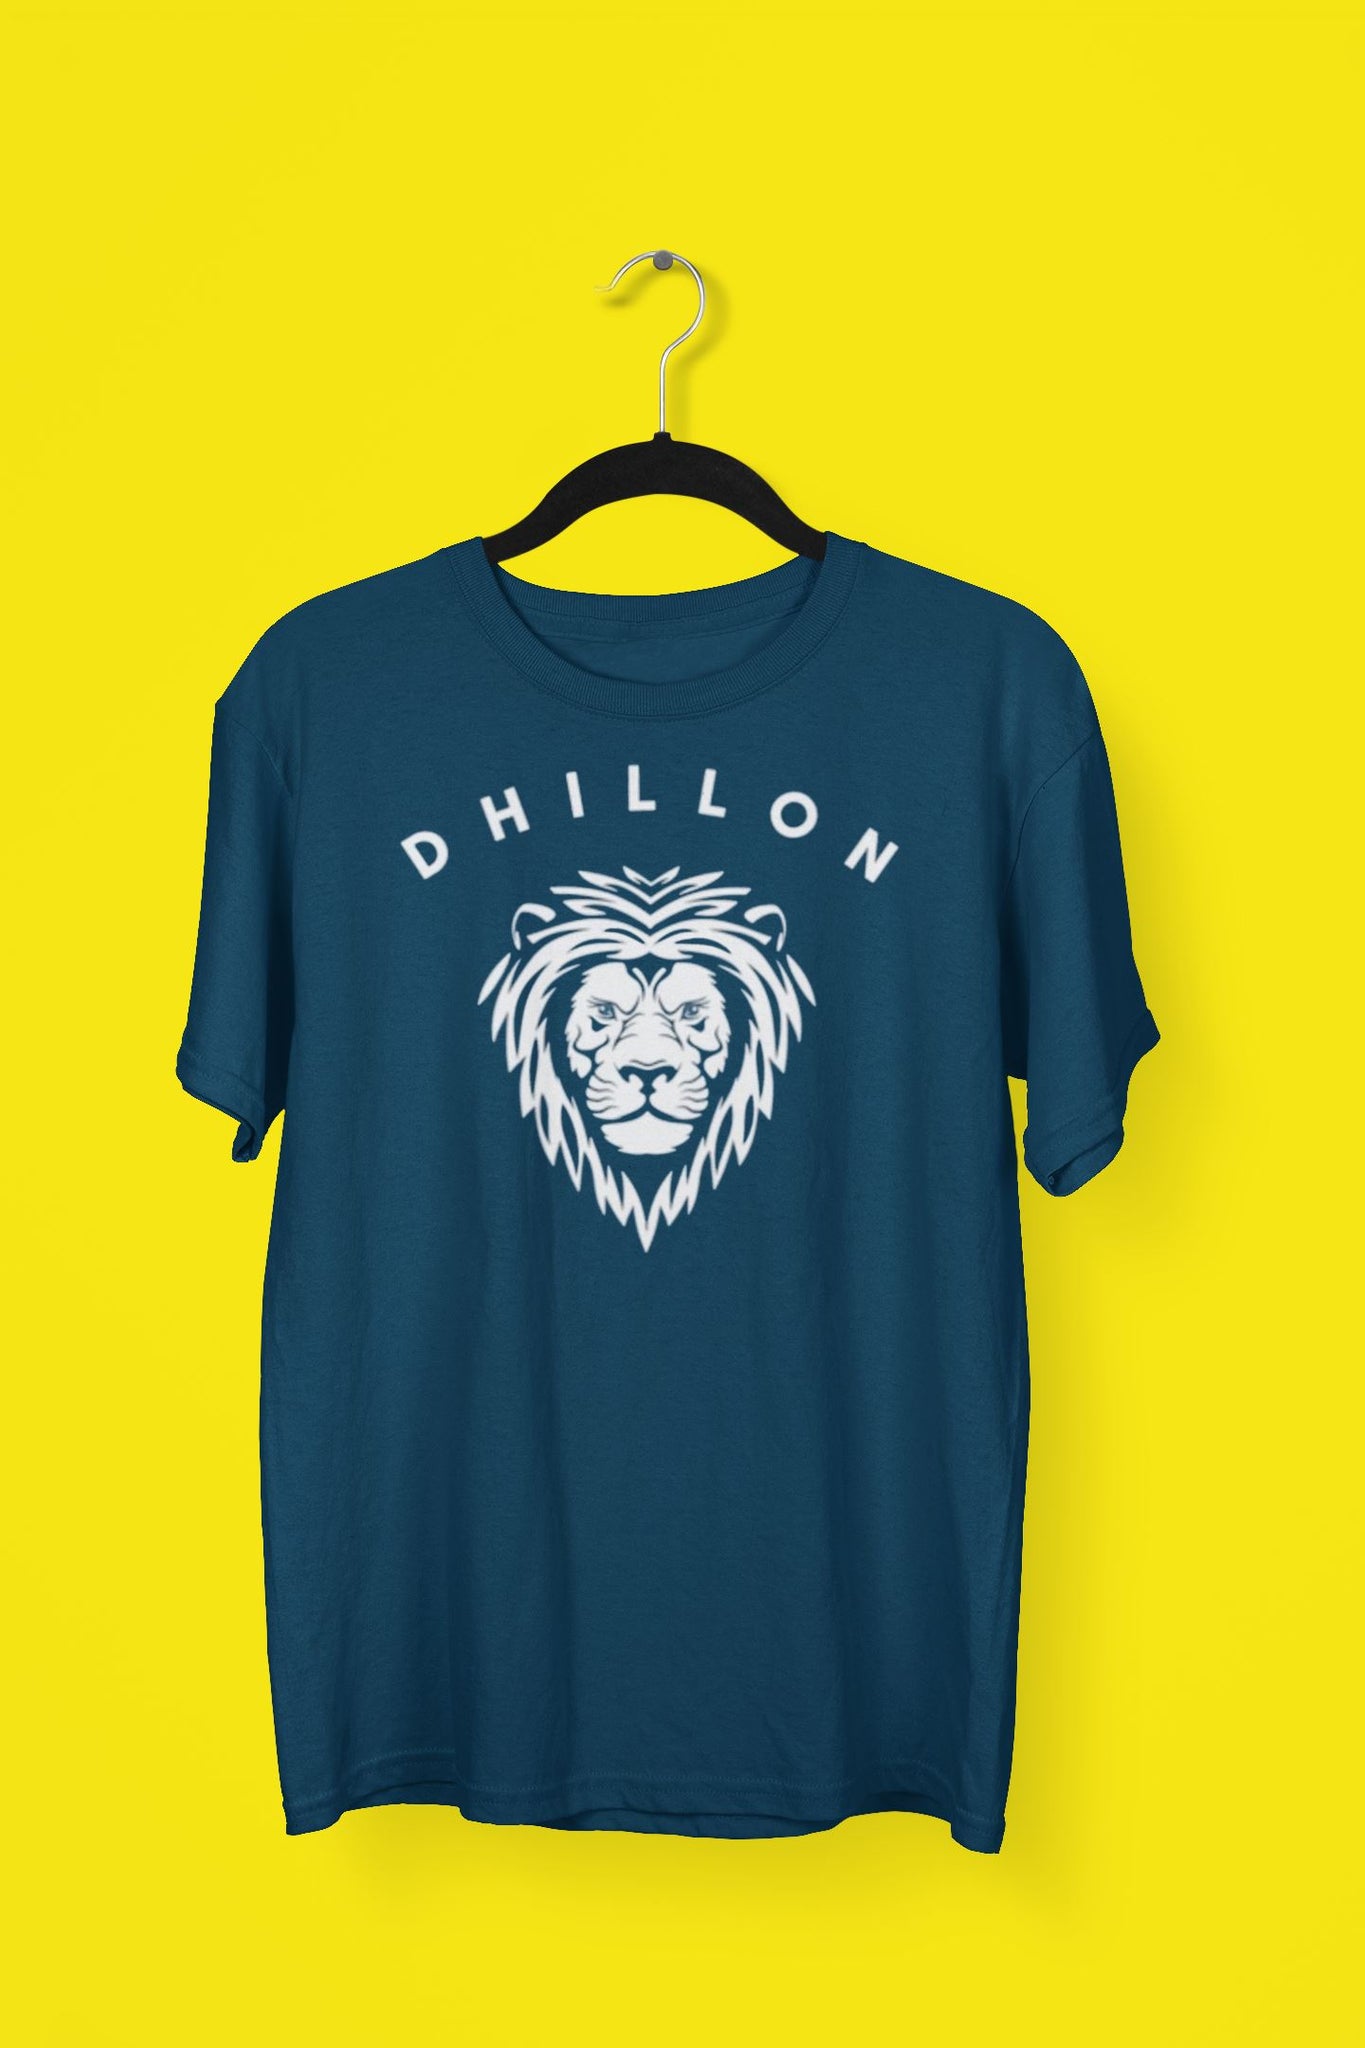 Dhillon The Punjabi Sher Exclusive Navy Blue T Shirt for Men and Women freeshipping - Catch My Drift India